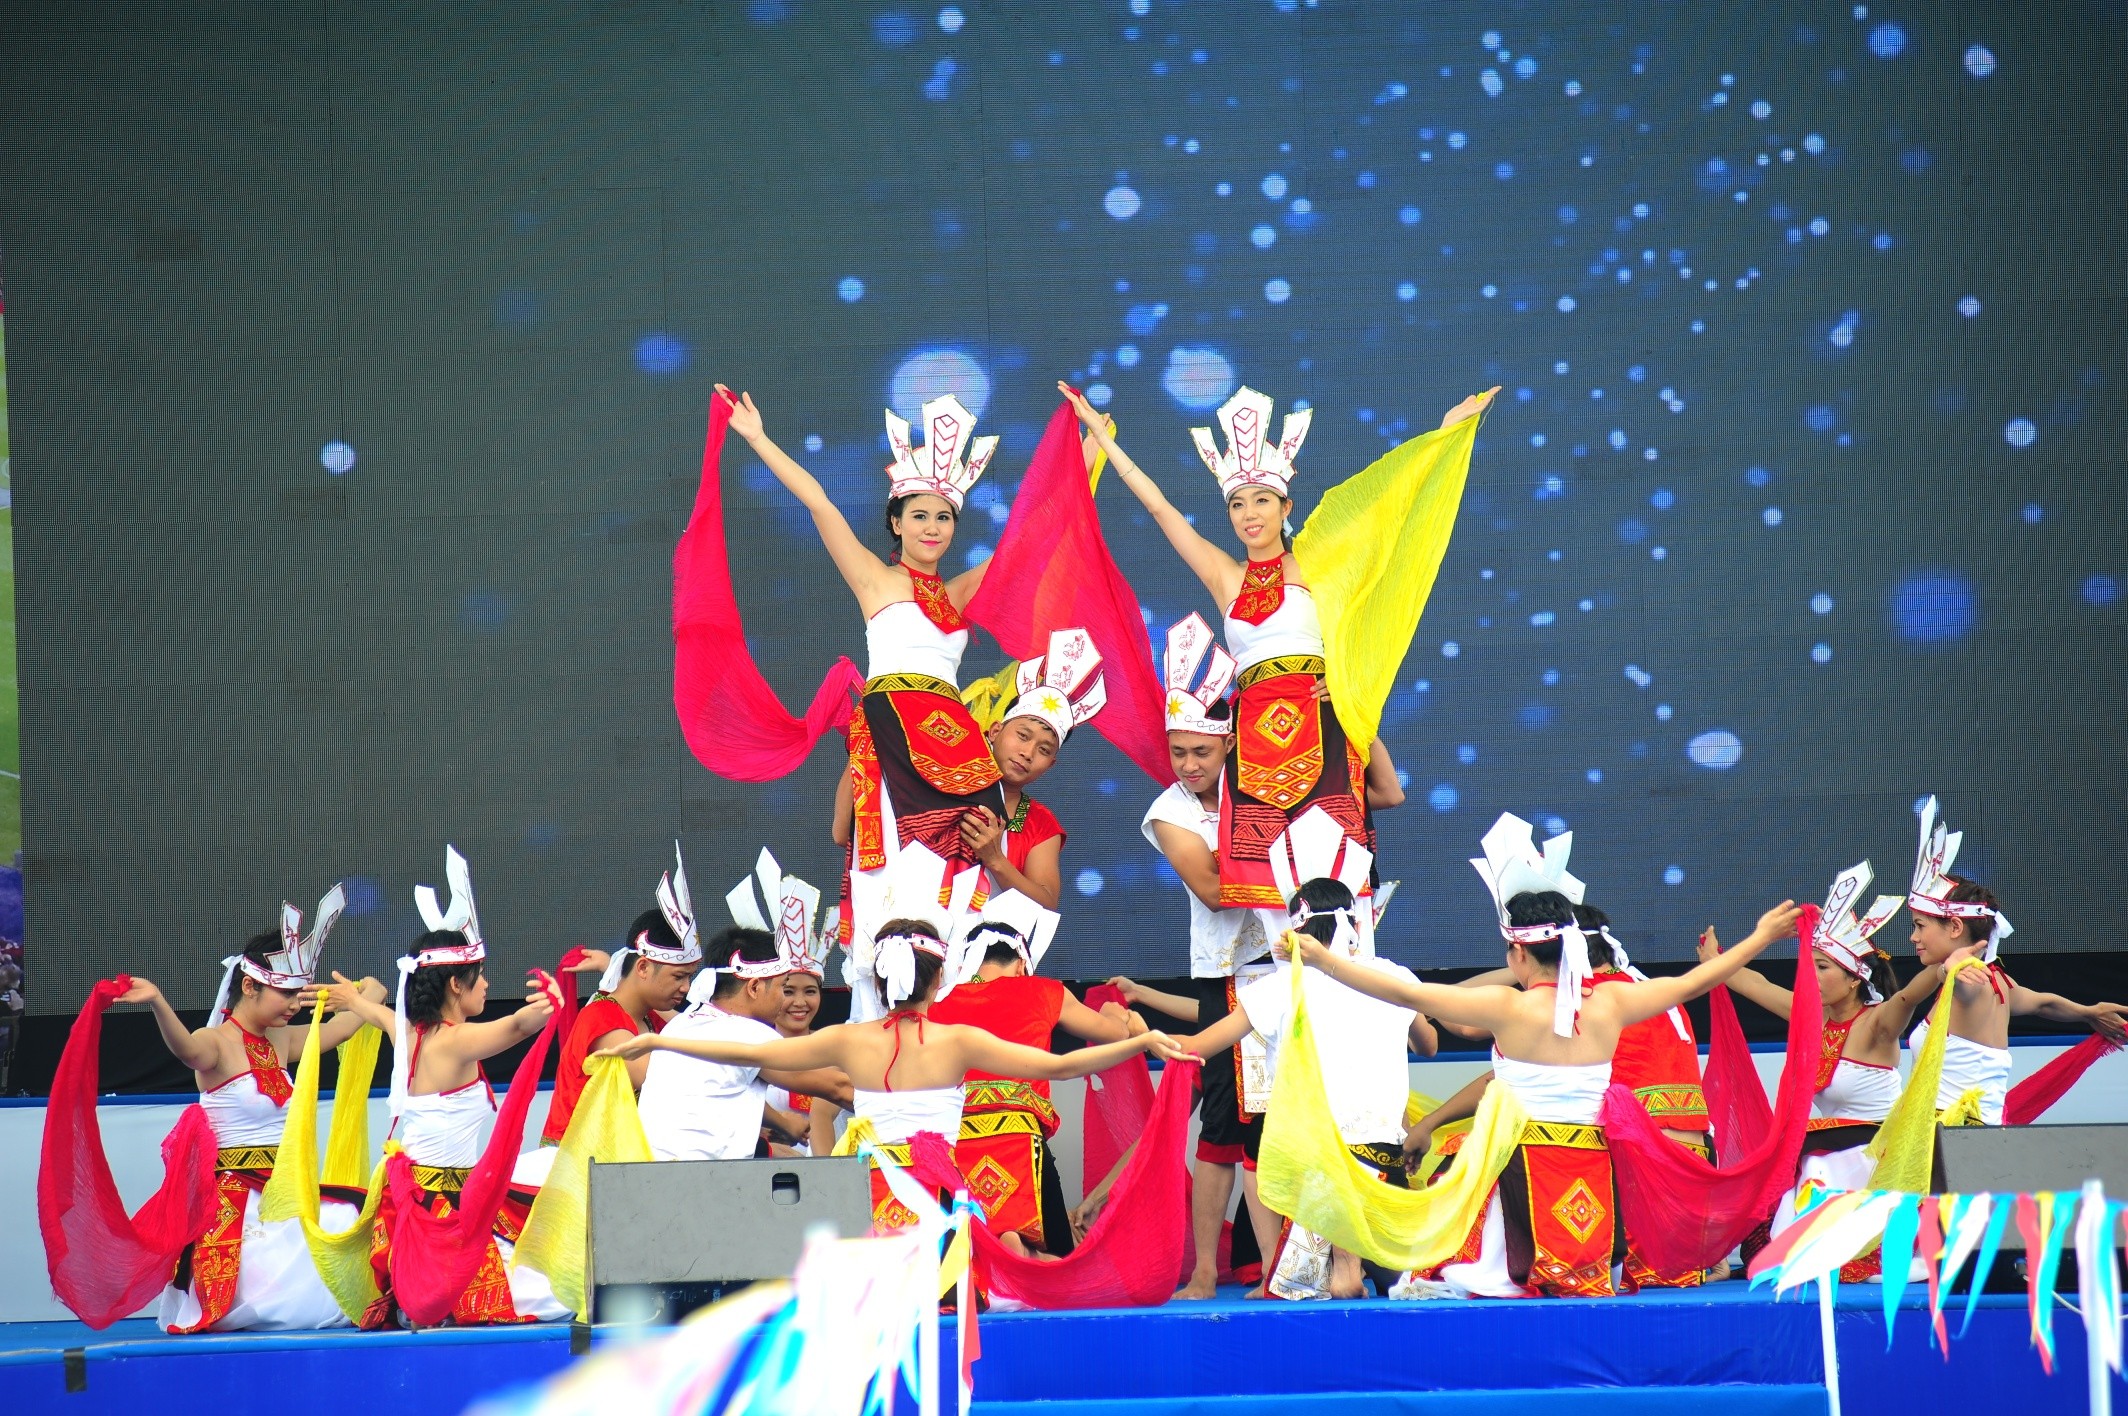 The Family Festival to memory the foundation of GS Battery Vietnam Co., Ltd was held on 11/05/2014 in Dai Nam Theme Park, Binh Duong Province.